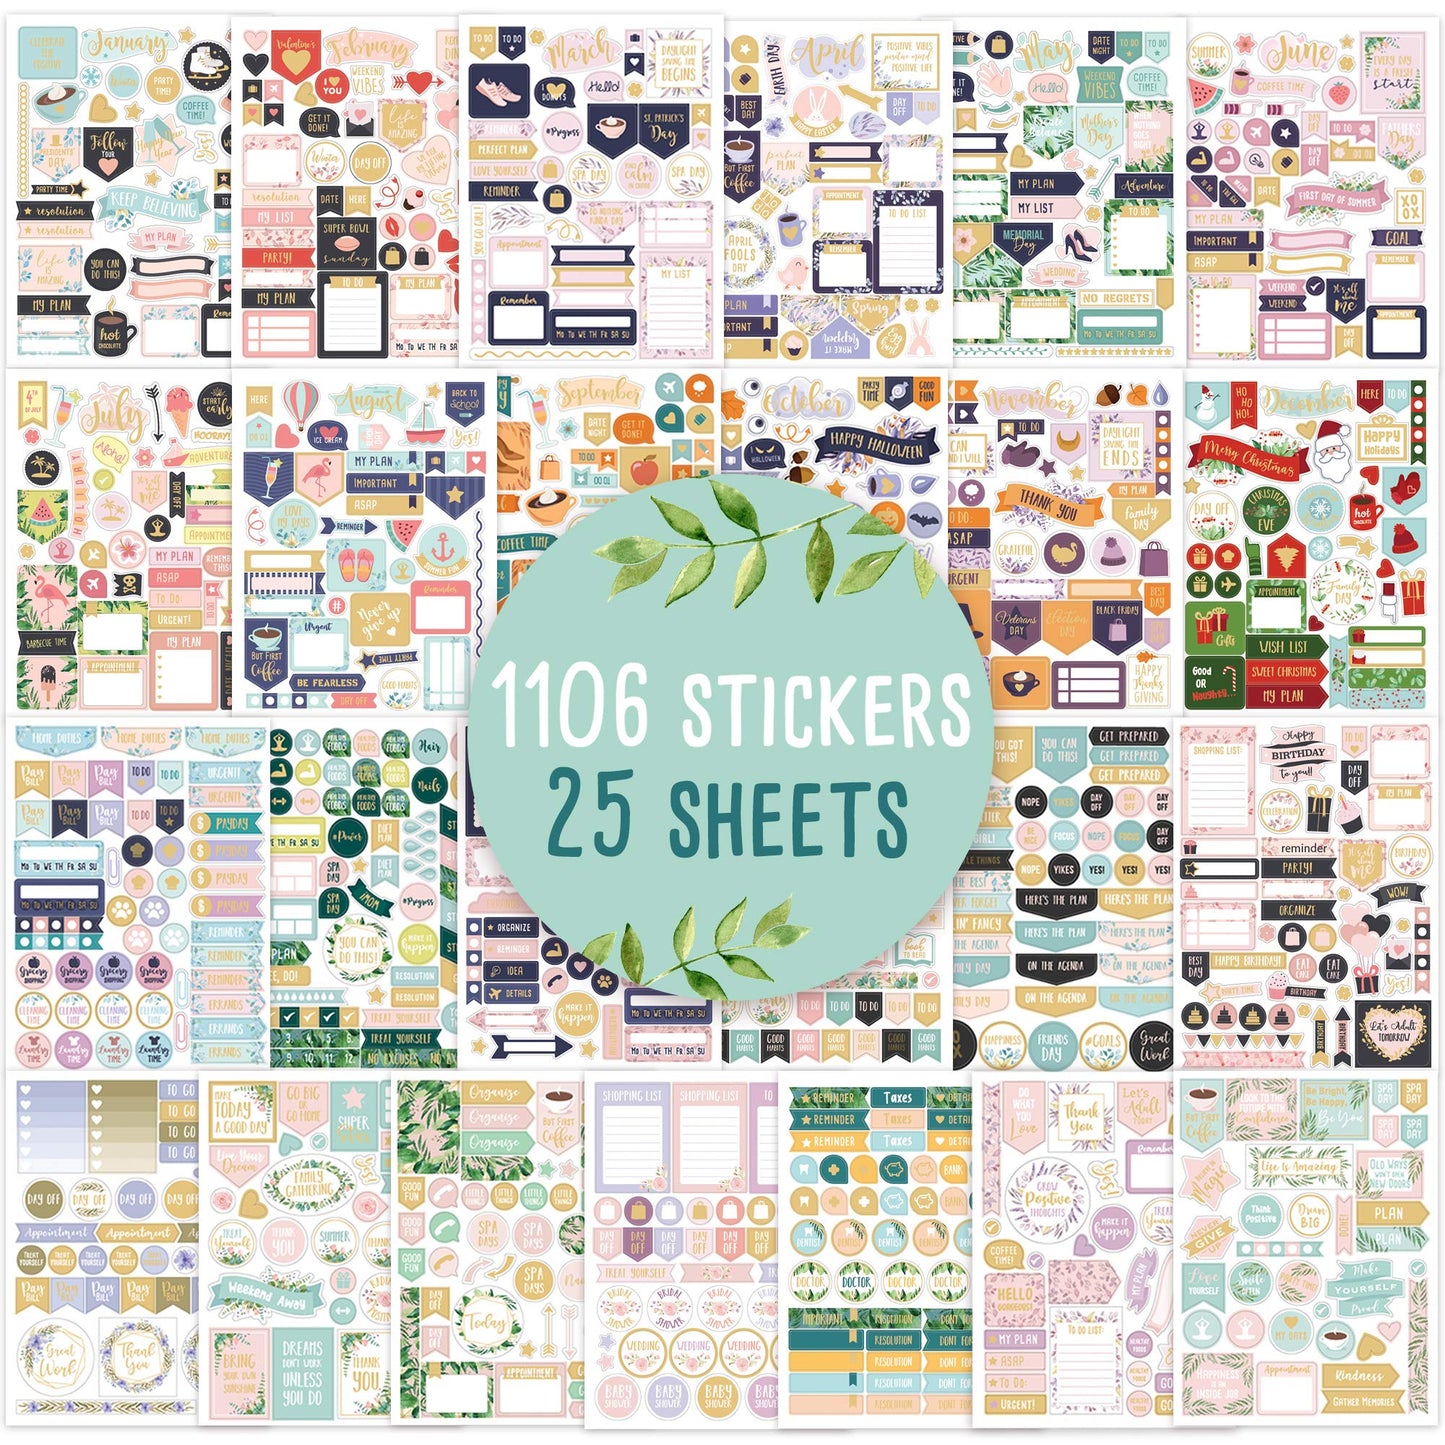 Aesthetic Greenery Planner Stickers for Fun Planning - 1100+ Stunning Gold Foil Monthly Designs - The Perfect Scrapbook Sticker Accessories to Enhance Your Daily Calendar and Planner Journaling